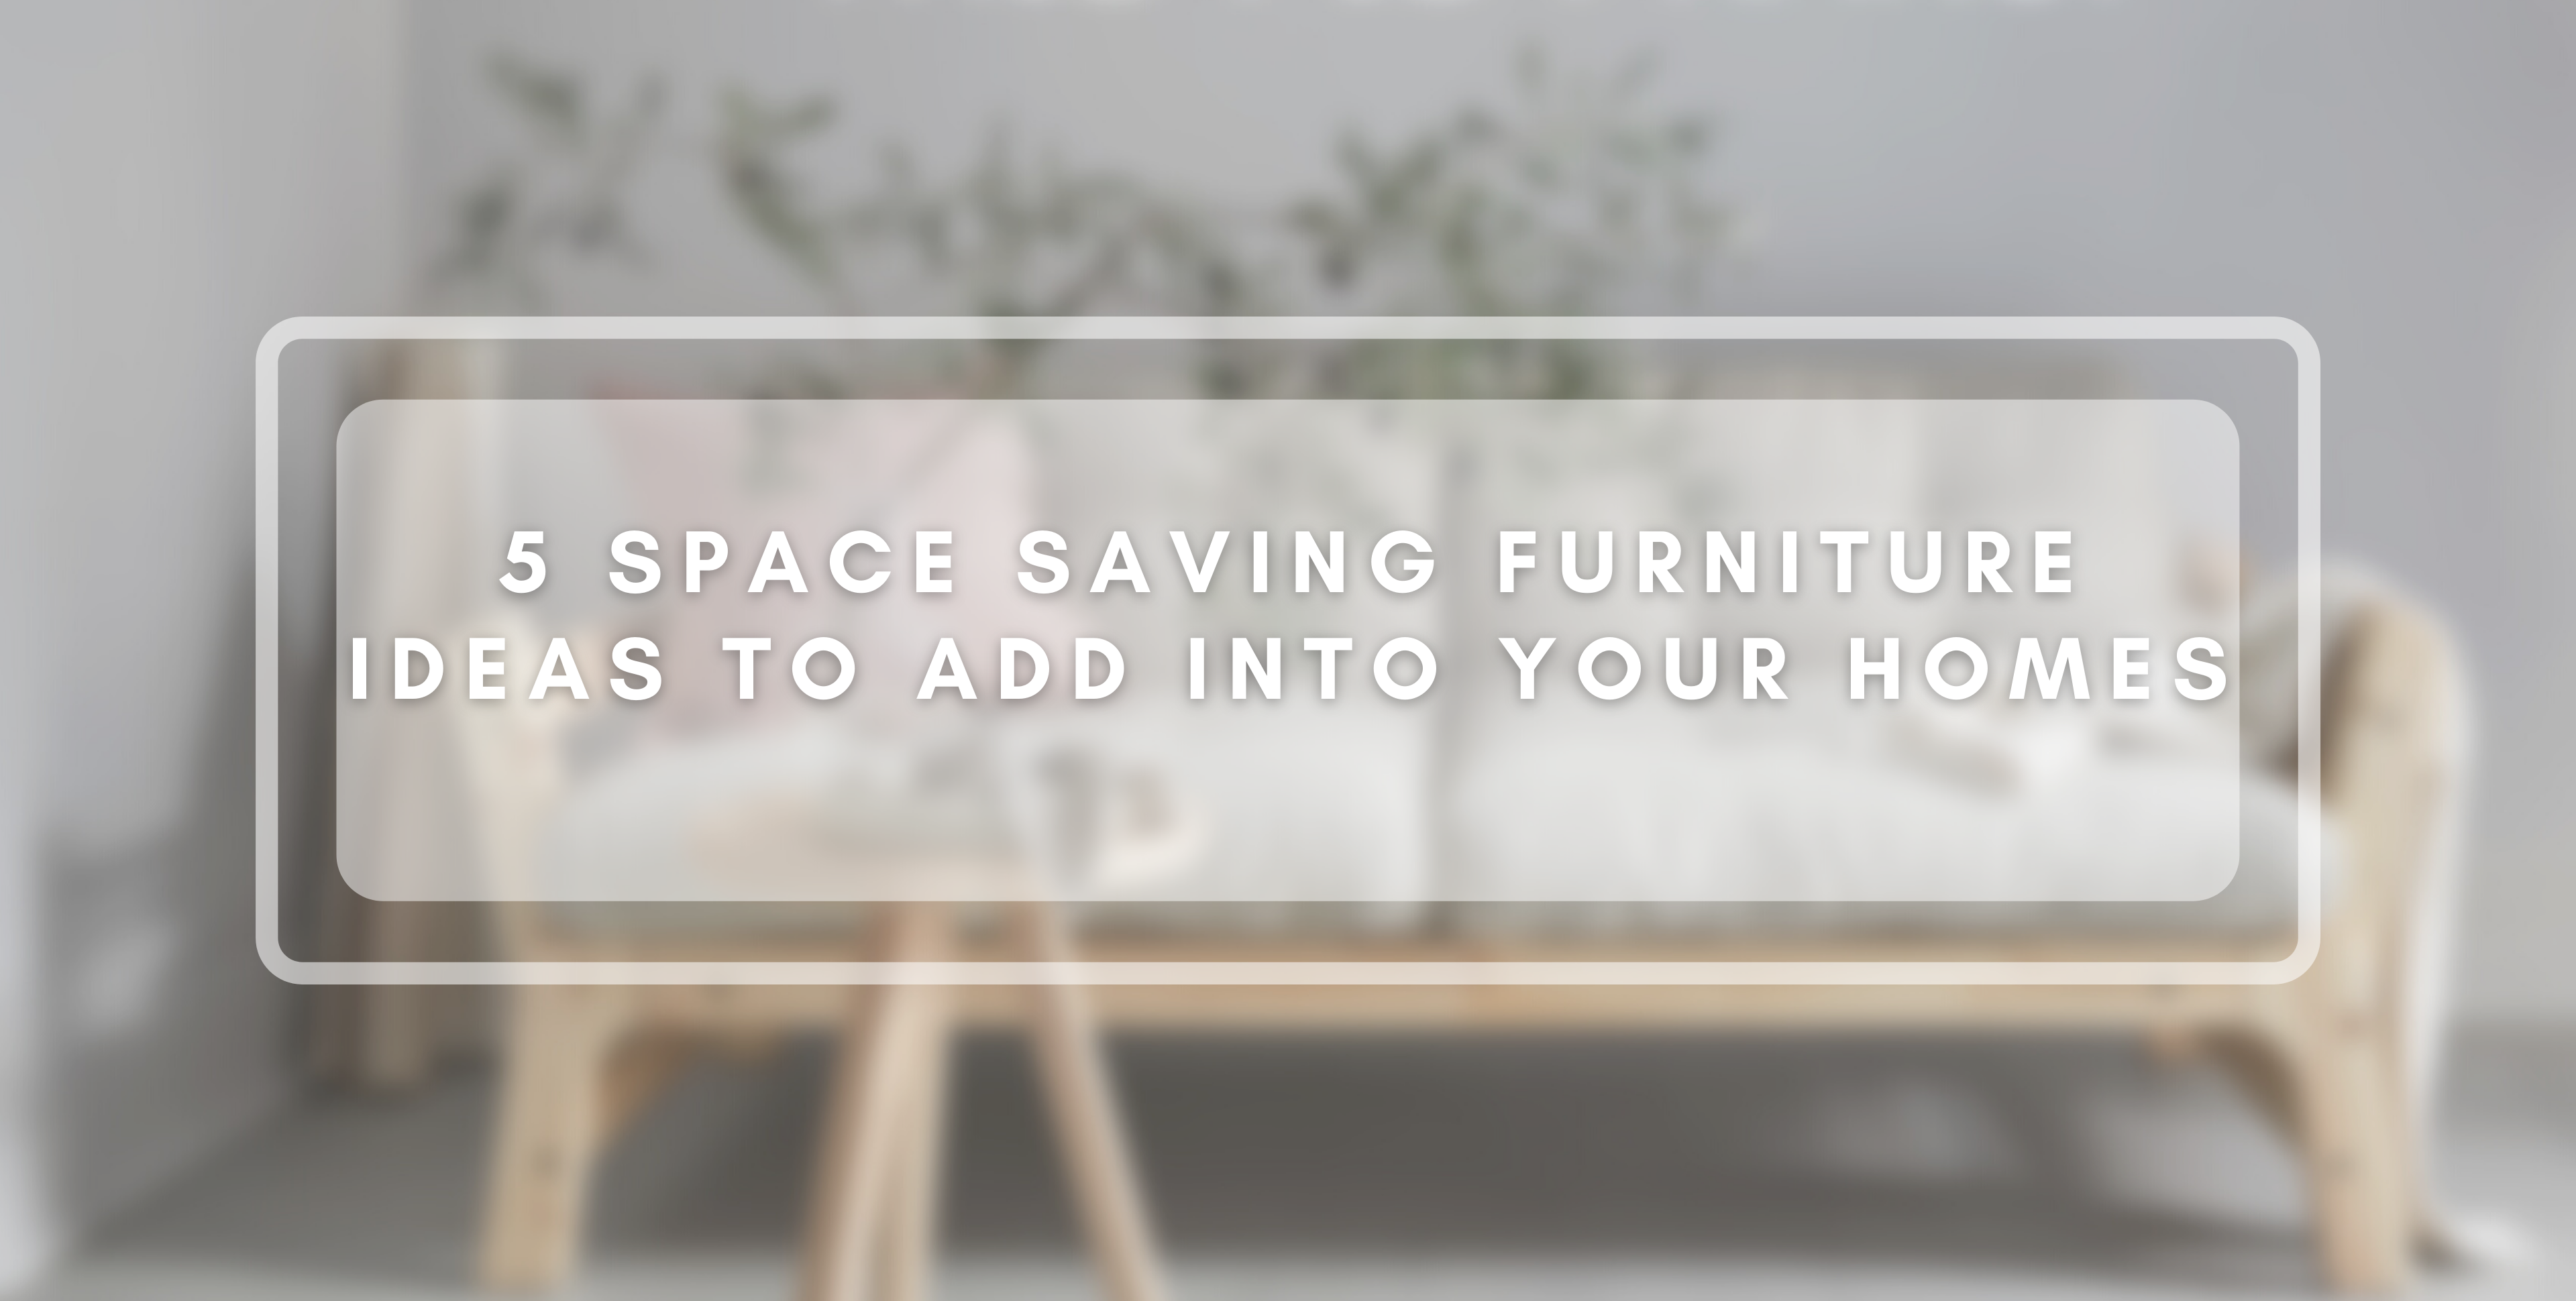 Space Saving Furniture Ideas for your Home